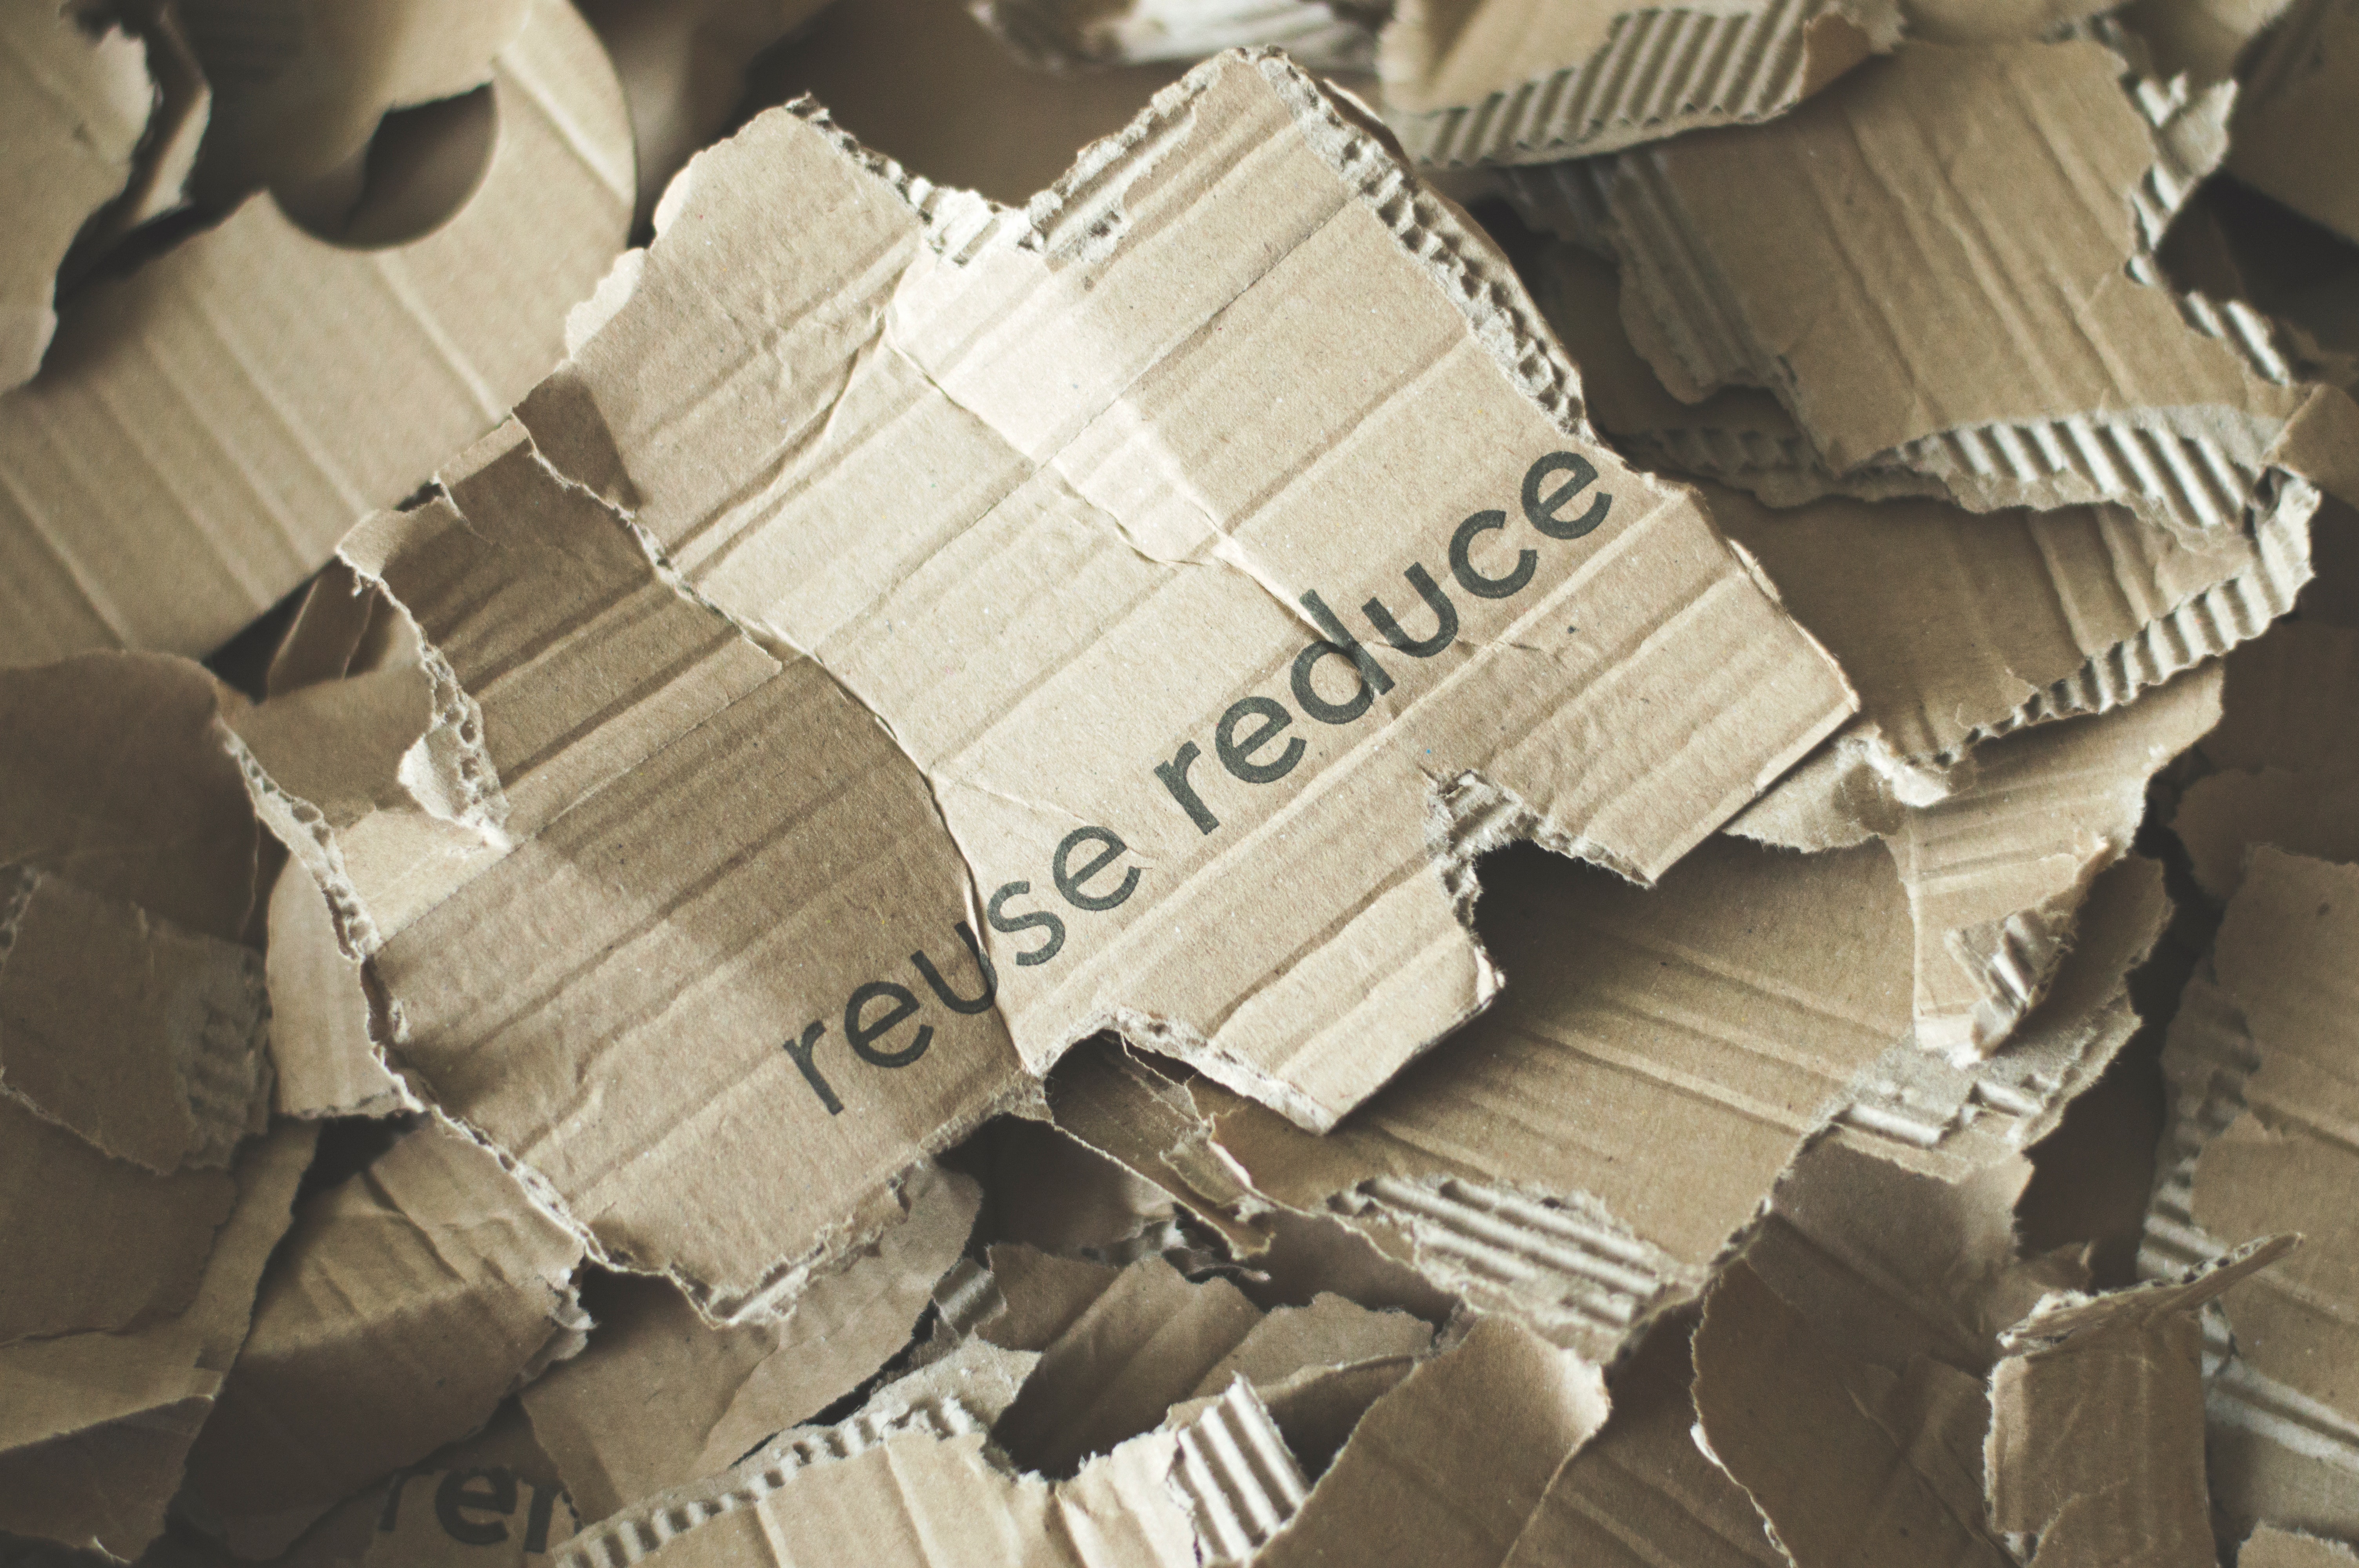 Reduce, Reuse, Recycle, Reform - Closing the Loop in E-Waste Plastic